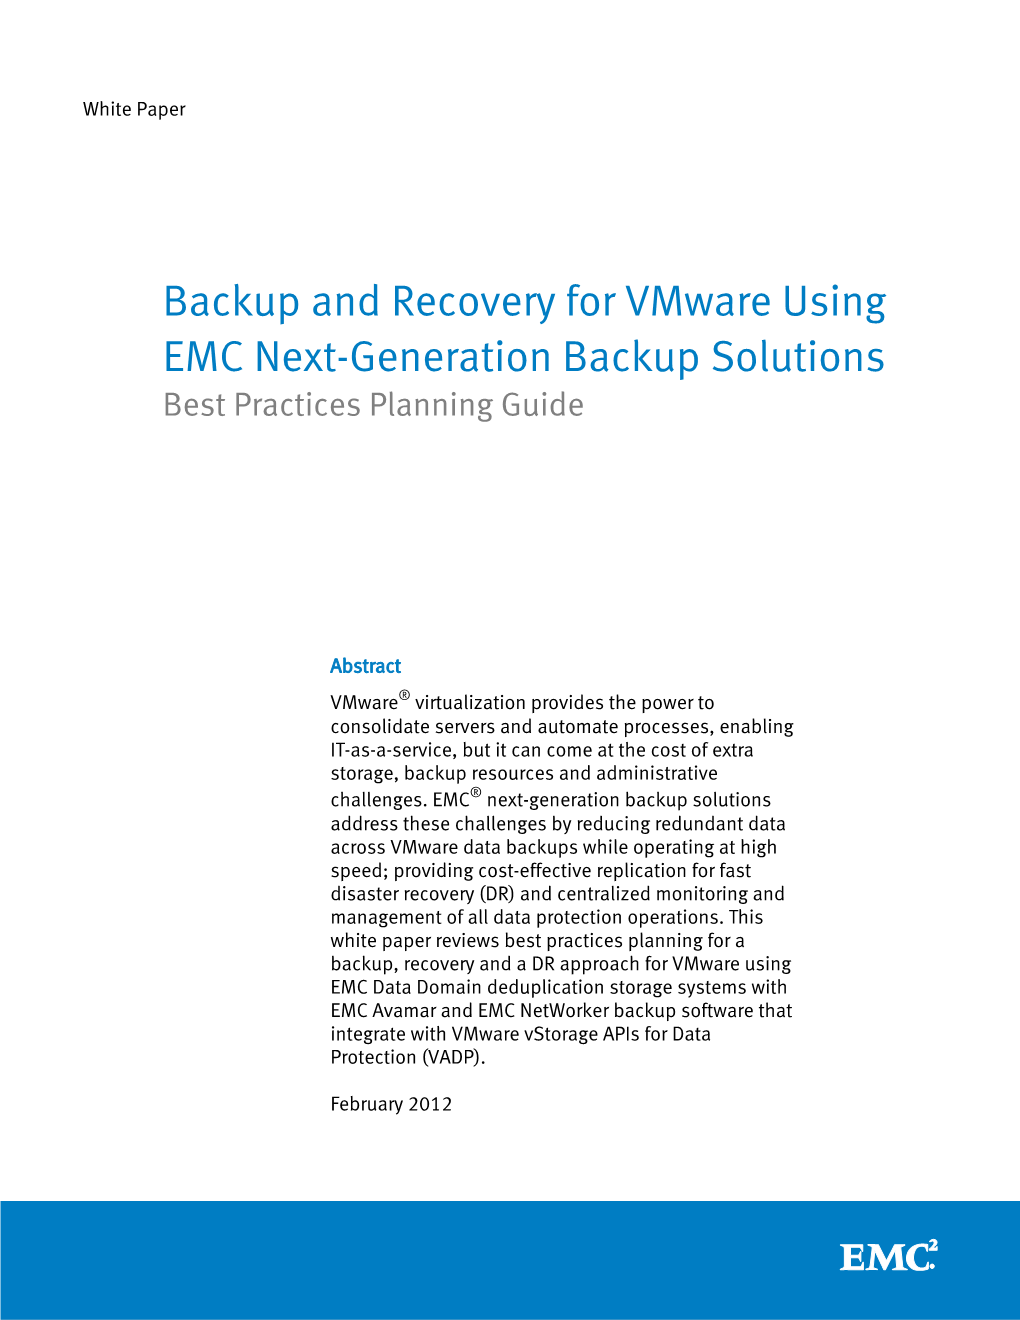 Backup and Recovery for Vmware Using EMC Next-Generation